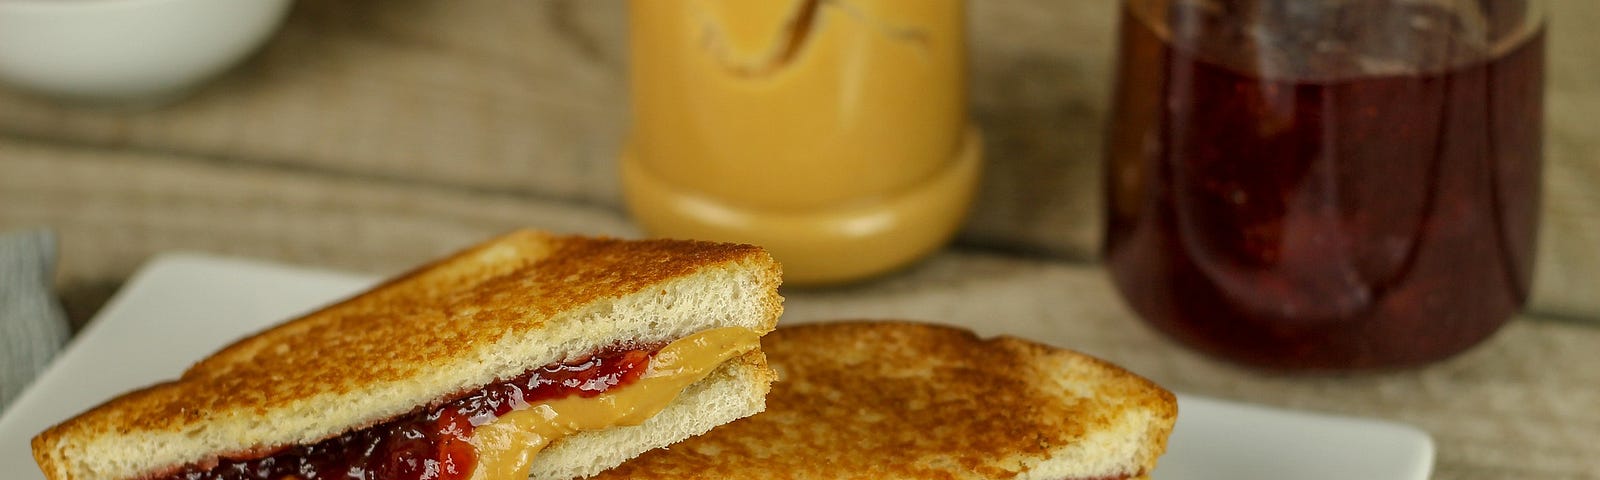 Image of a peanut butter and jelly sandwich